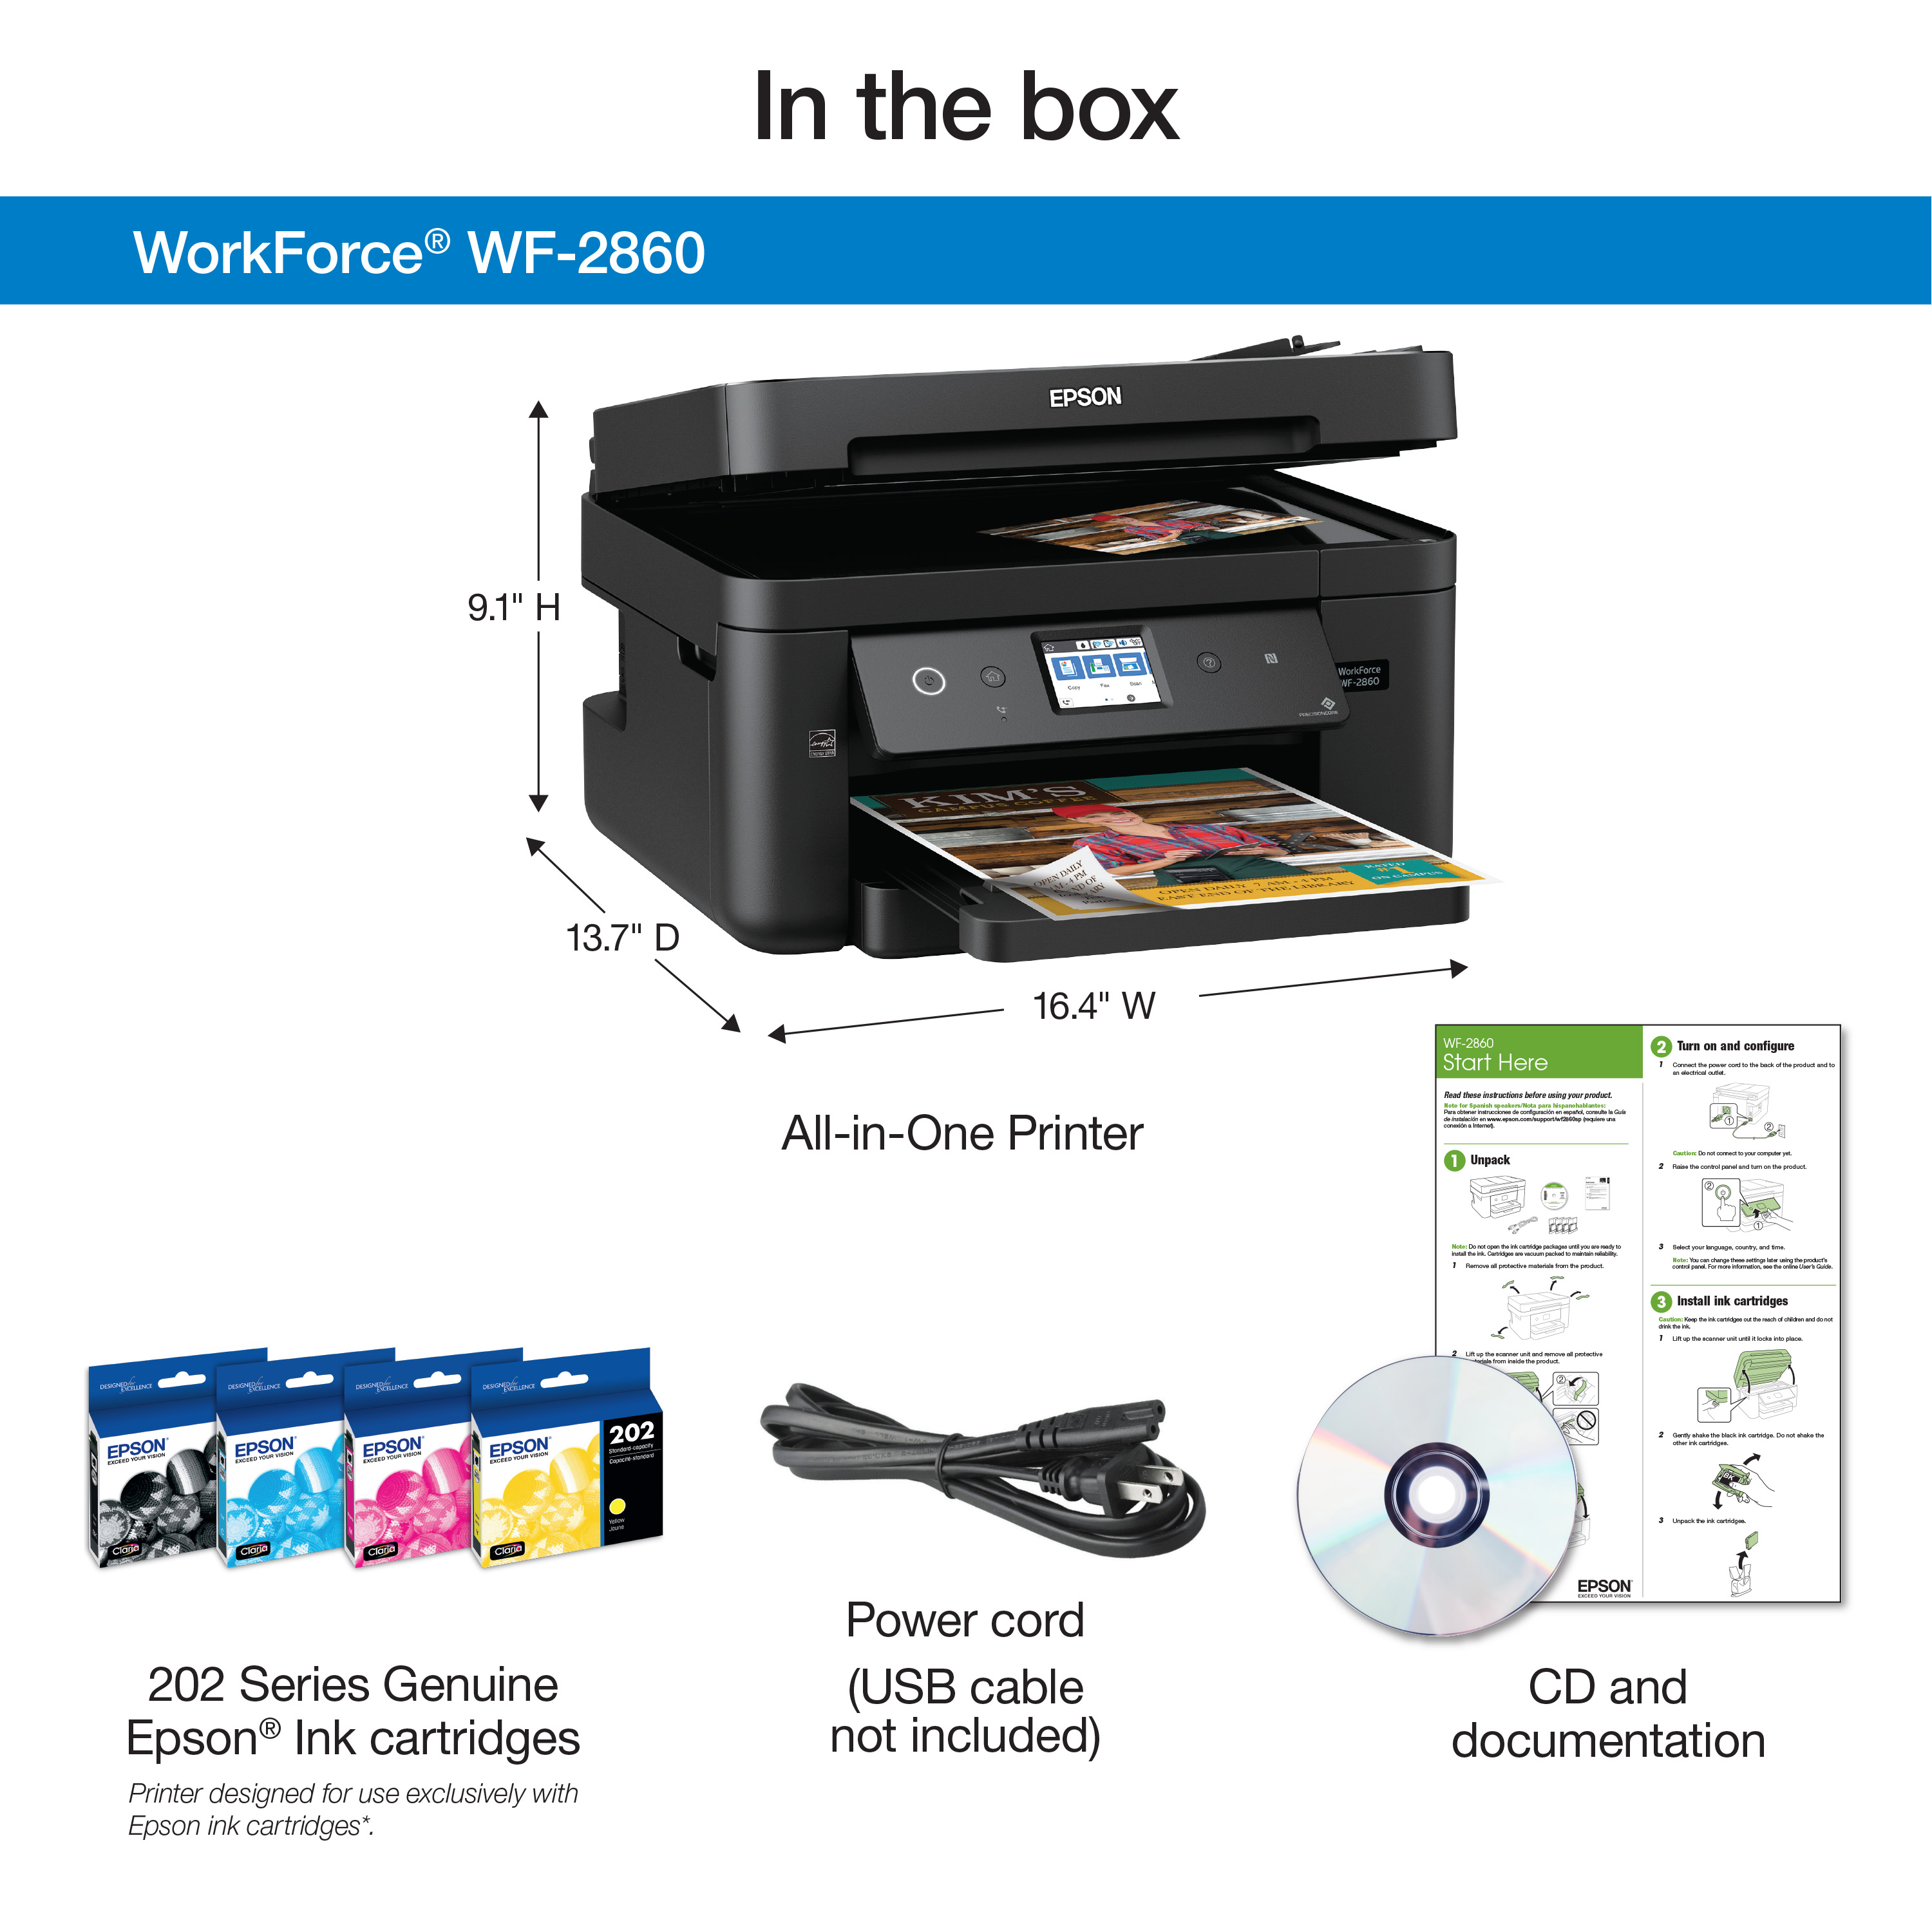 Epson WorkForce WF-2860 All-in-One Wireless Color Printer with Scanner, Copier, Fax, Ethernet, Wi-Fi Direct and NFC - image 4 of 6